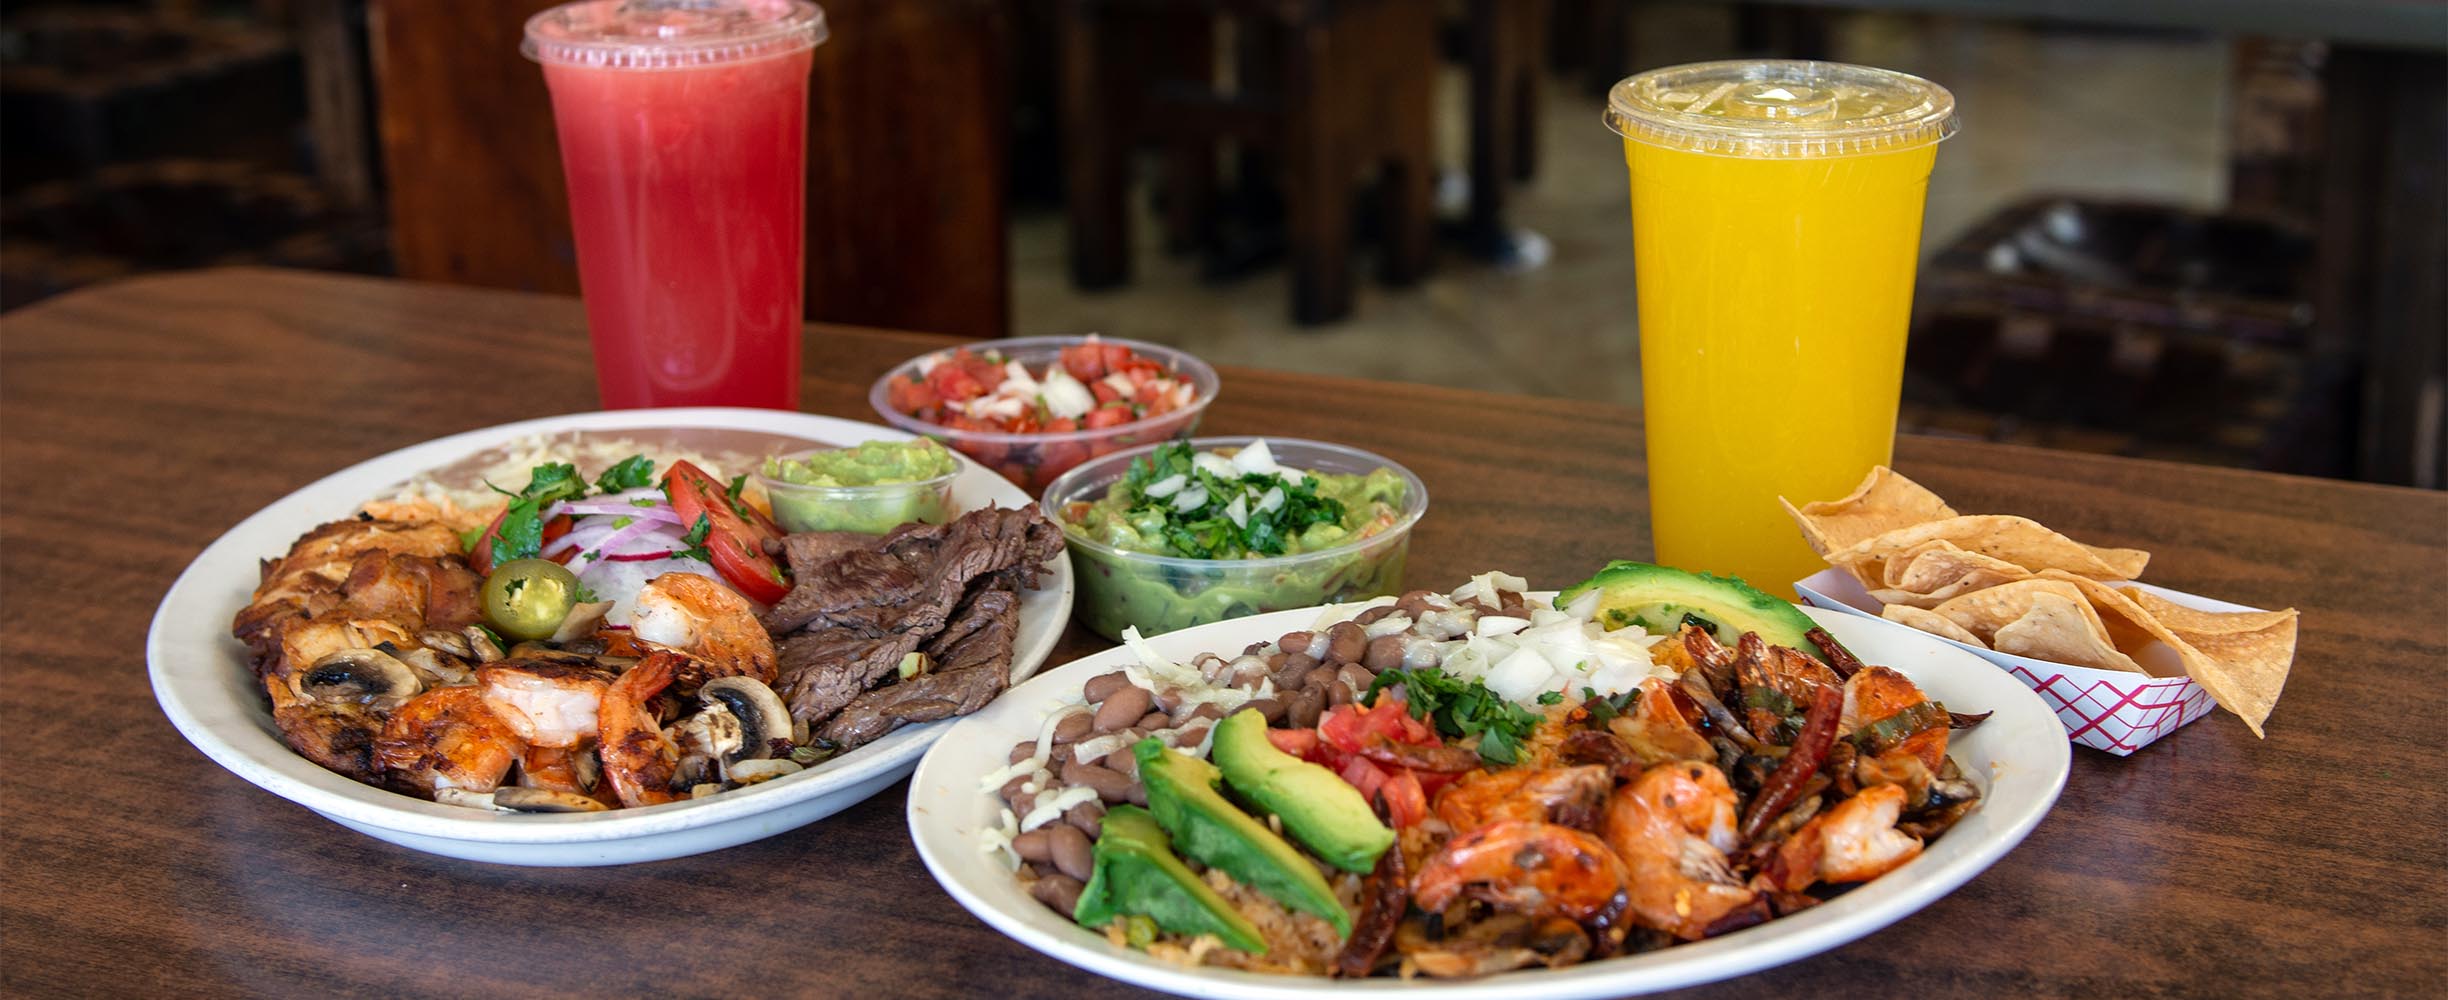 Our Mexican Food is authentic, every dish is created as true Mexican Food.